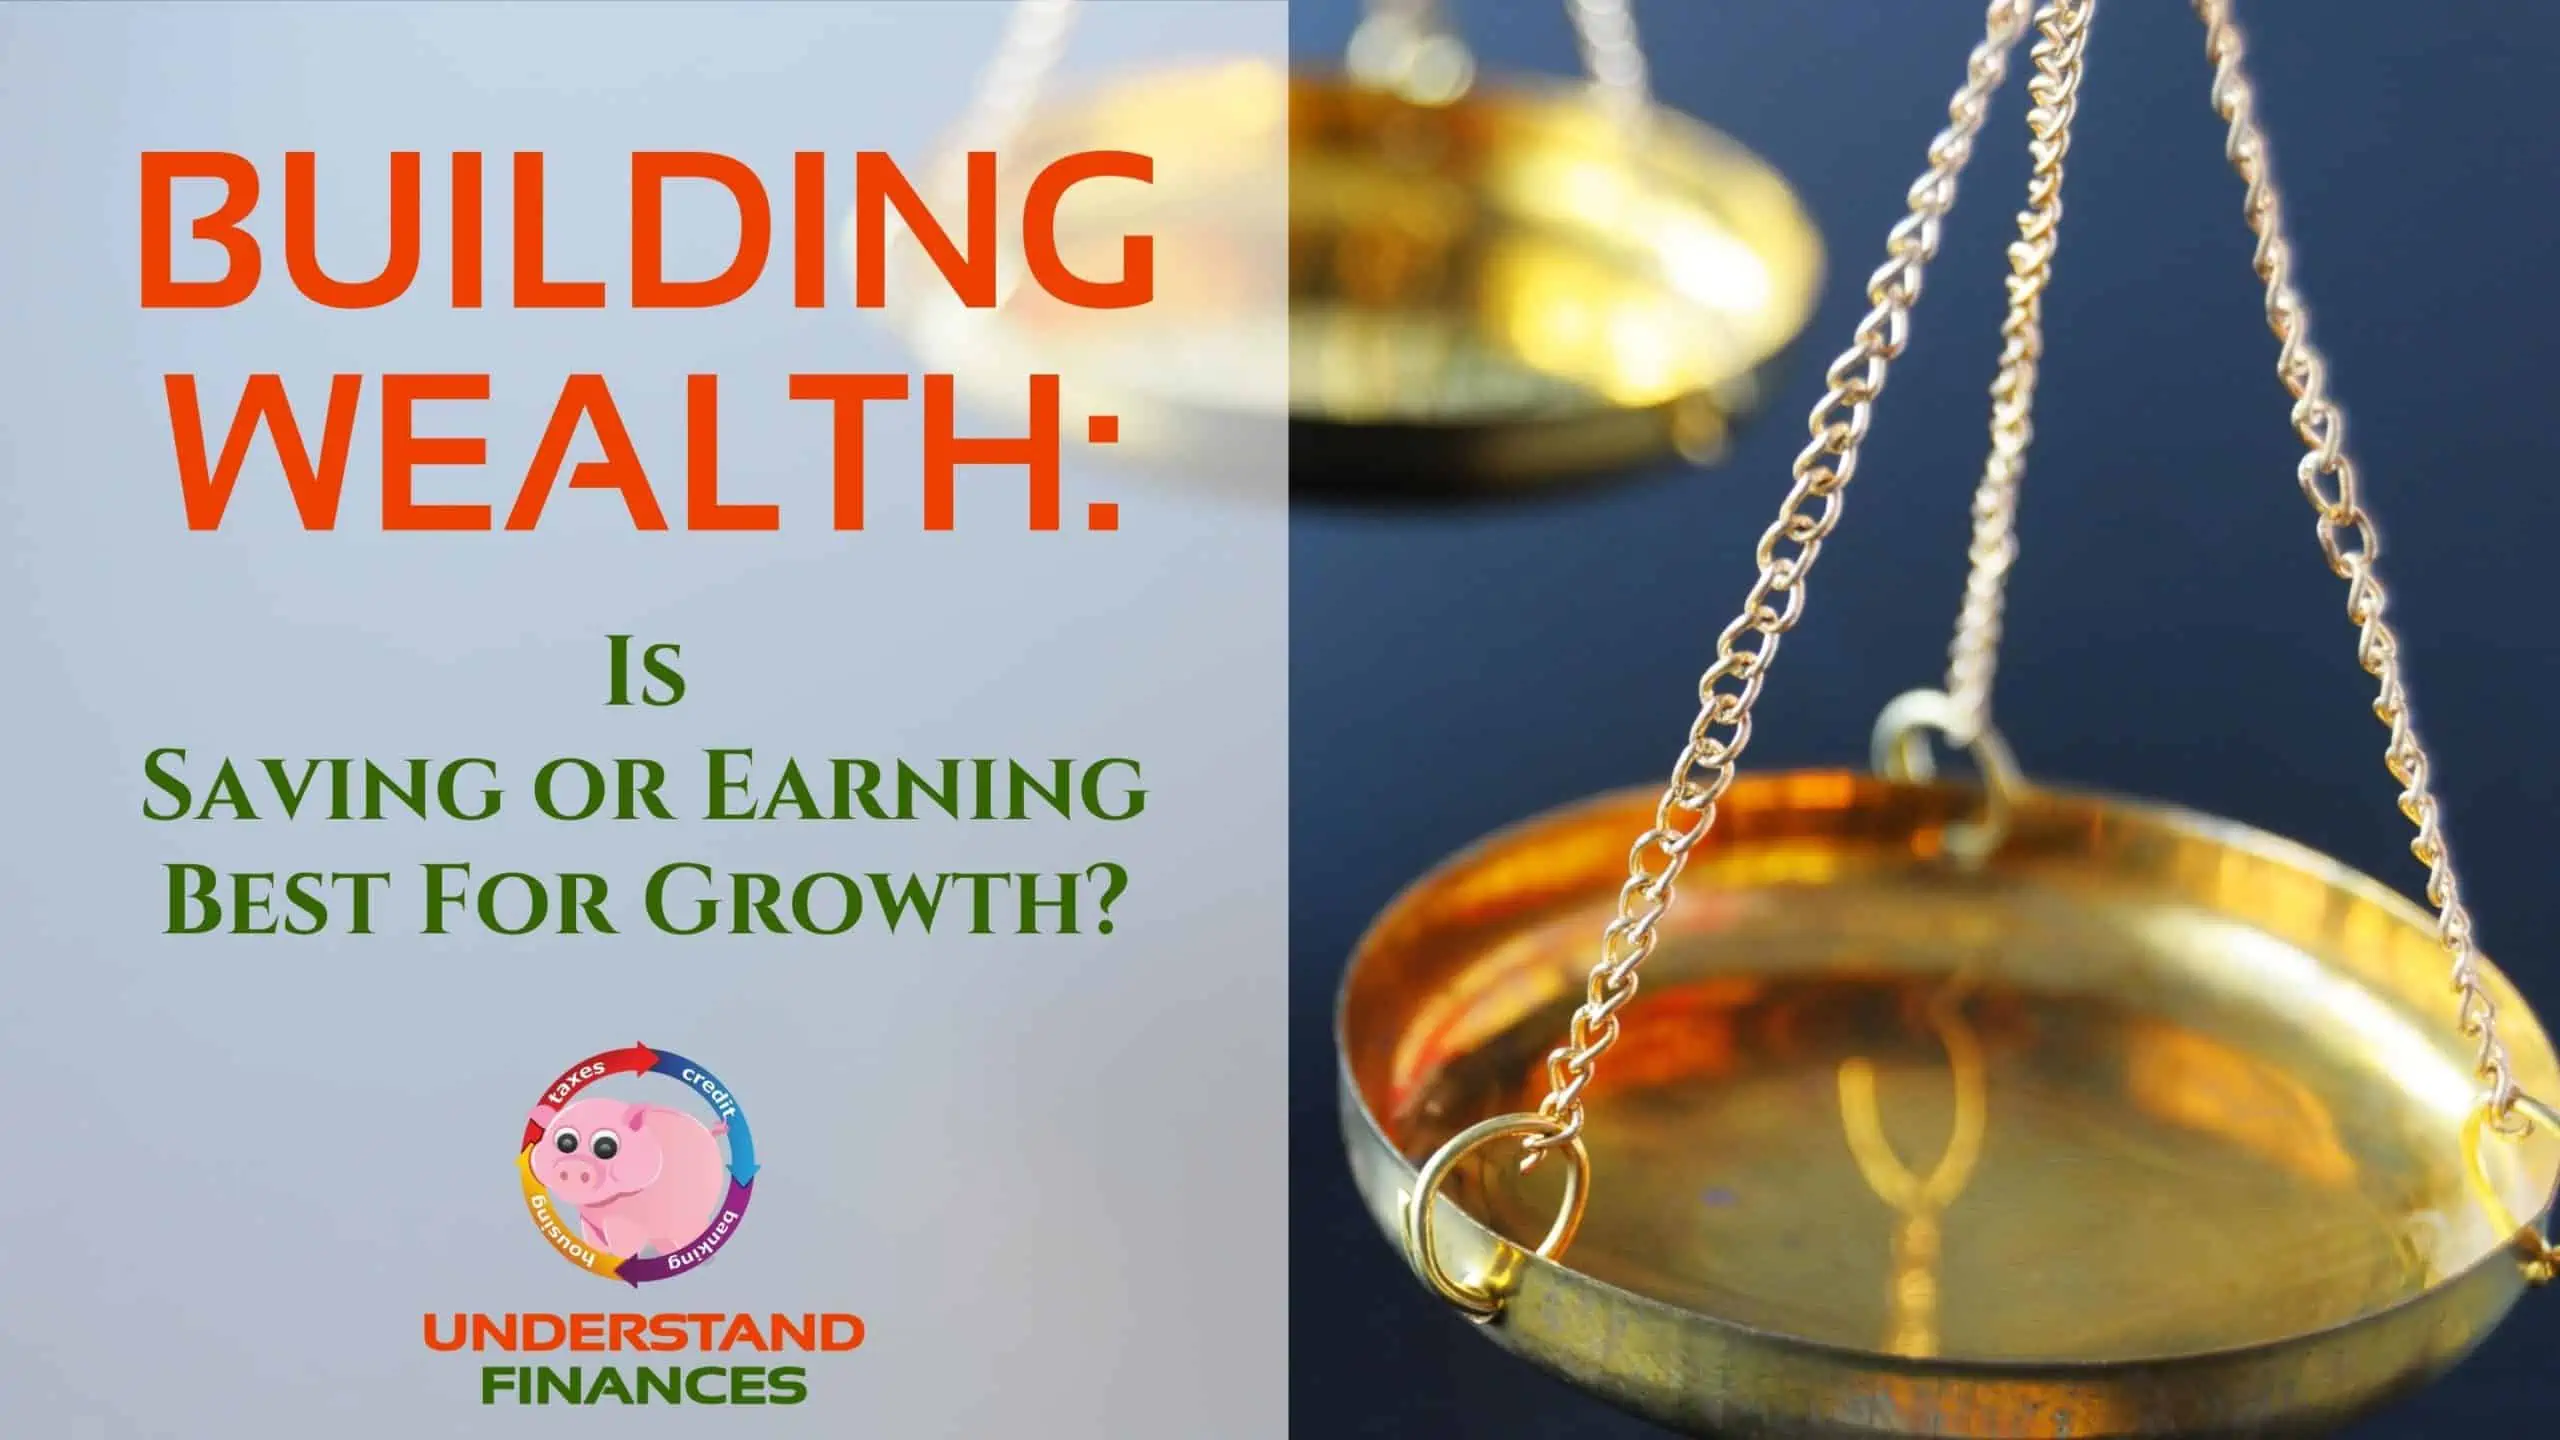 Building Wealth: Is Saving or Earning Best For Growth?